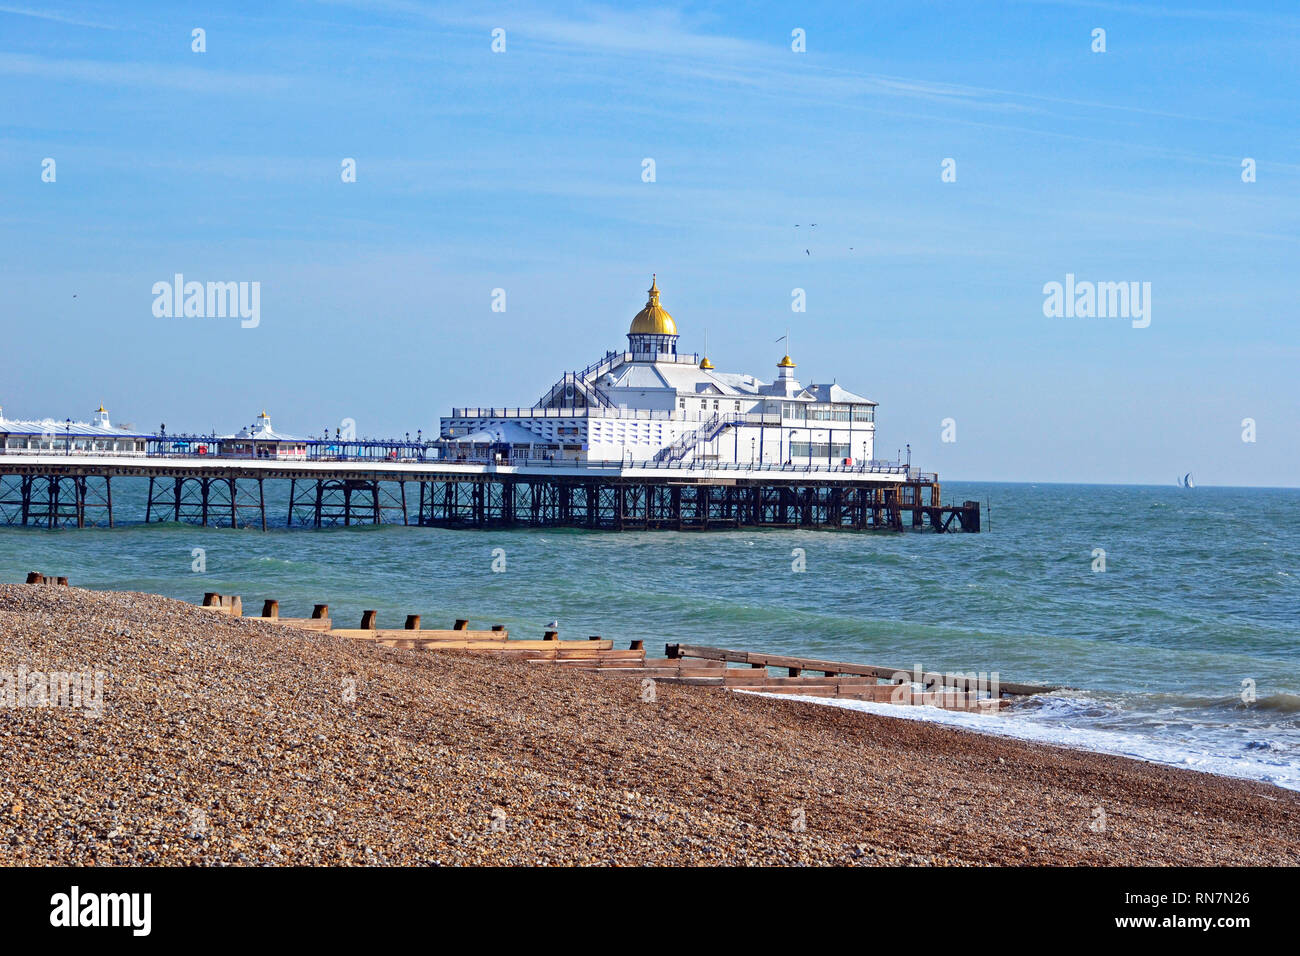 View of Eastbourne Pier, Beach and Seafront from the Promenade, England, UK Stock Photo